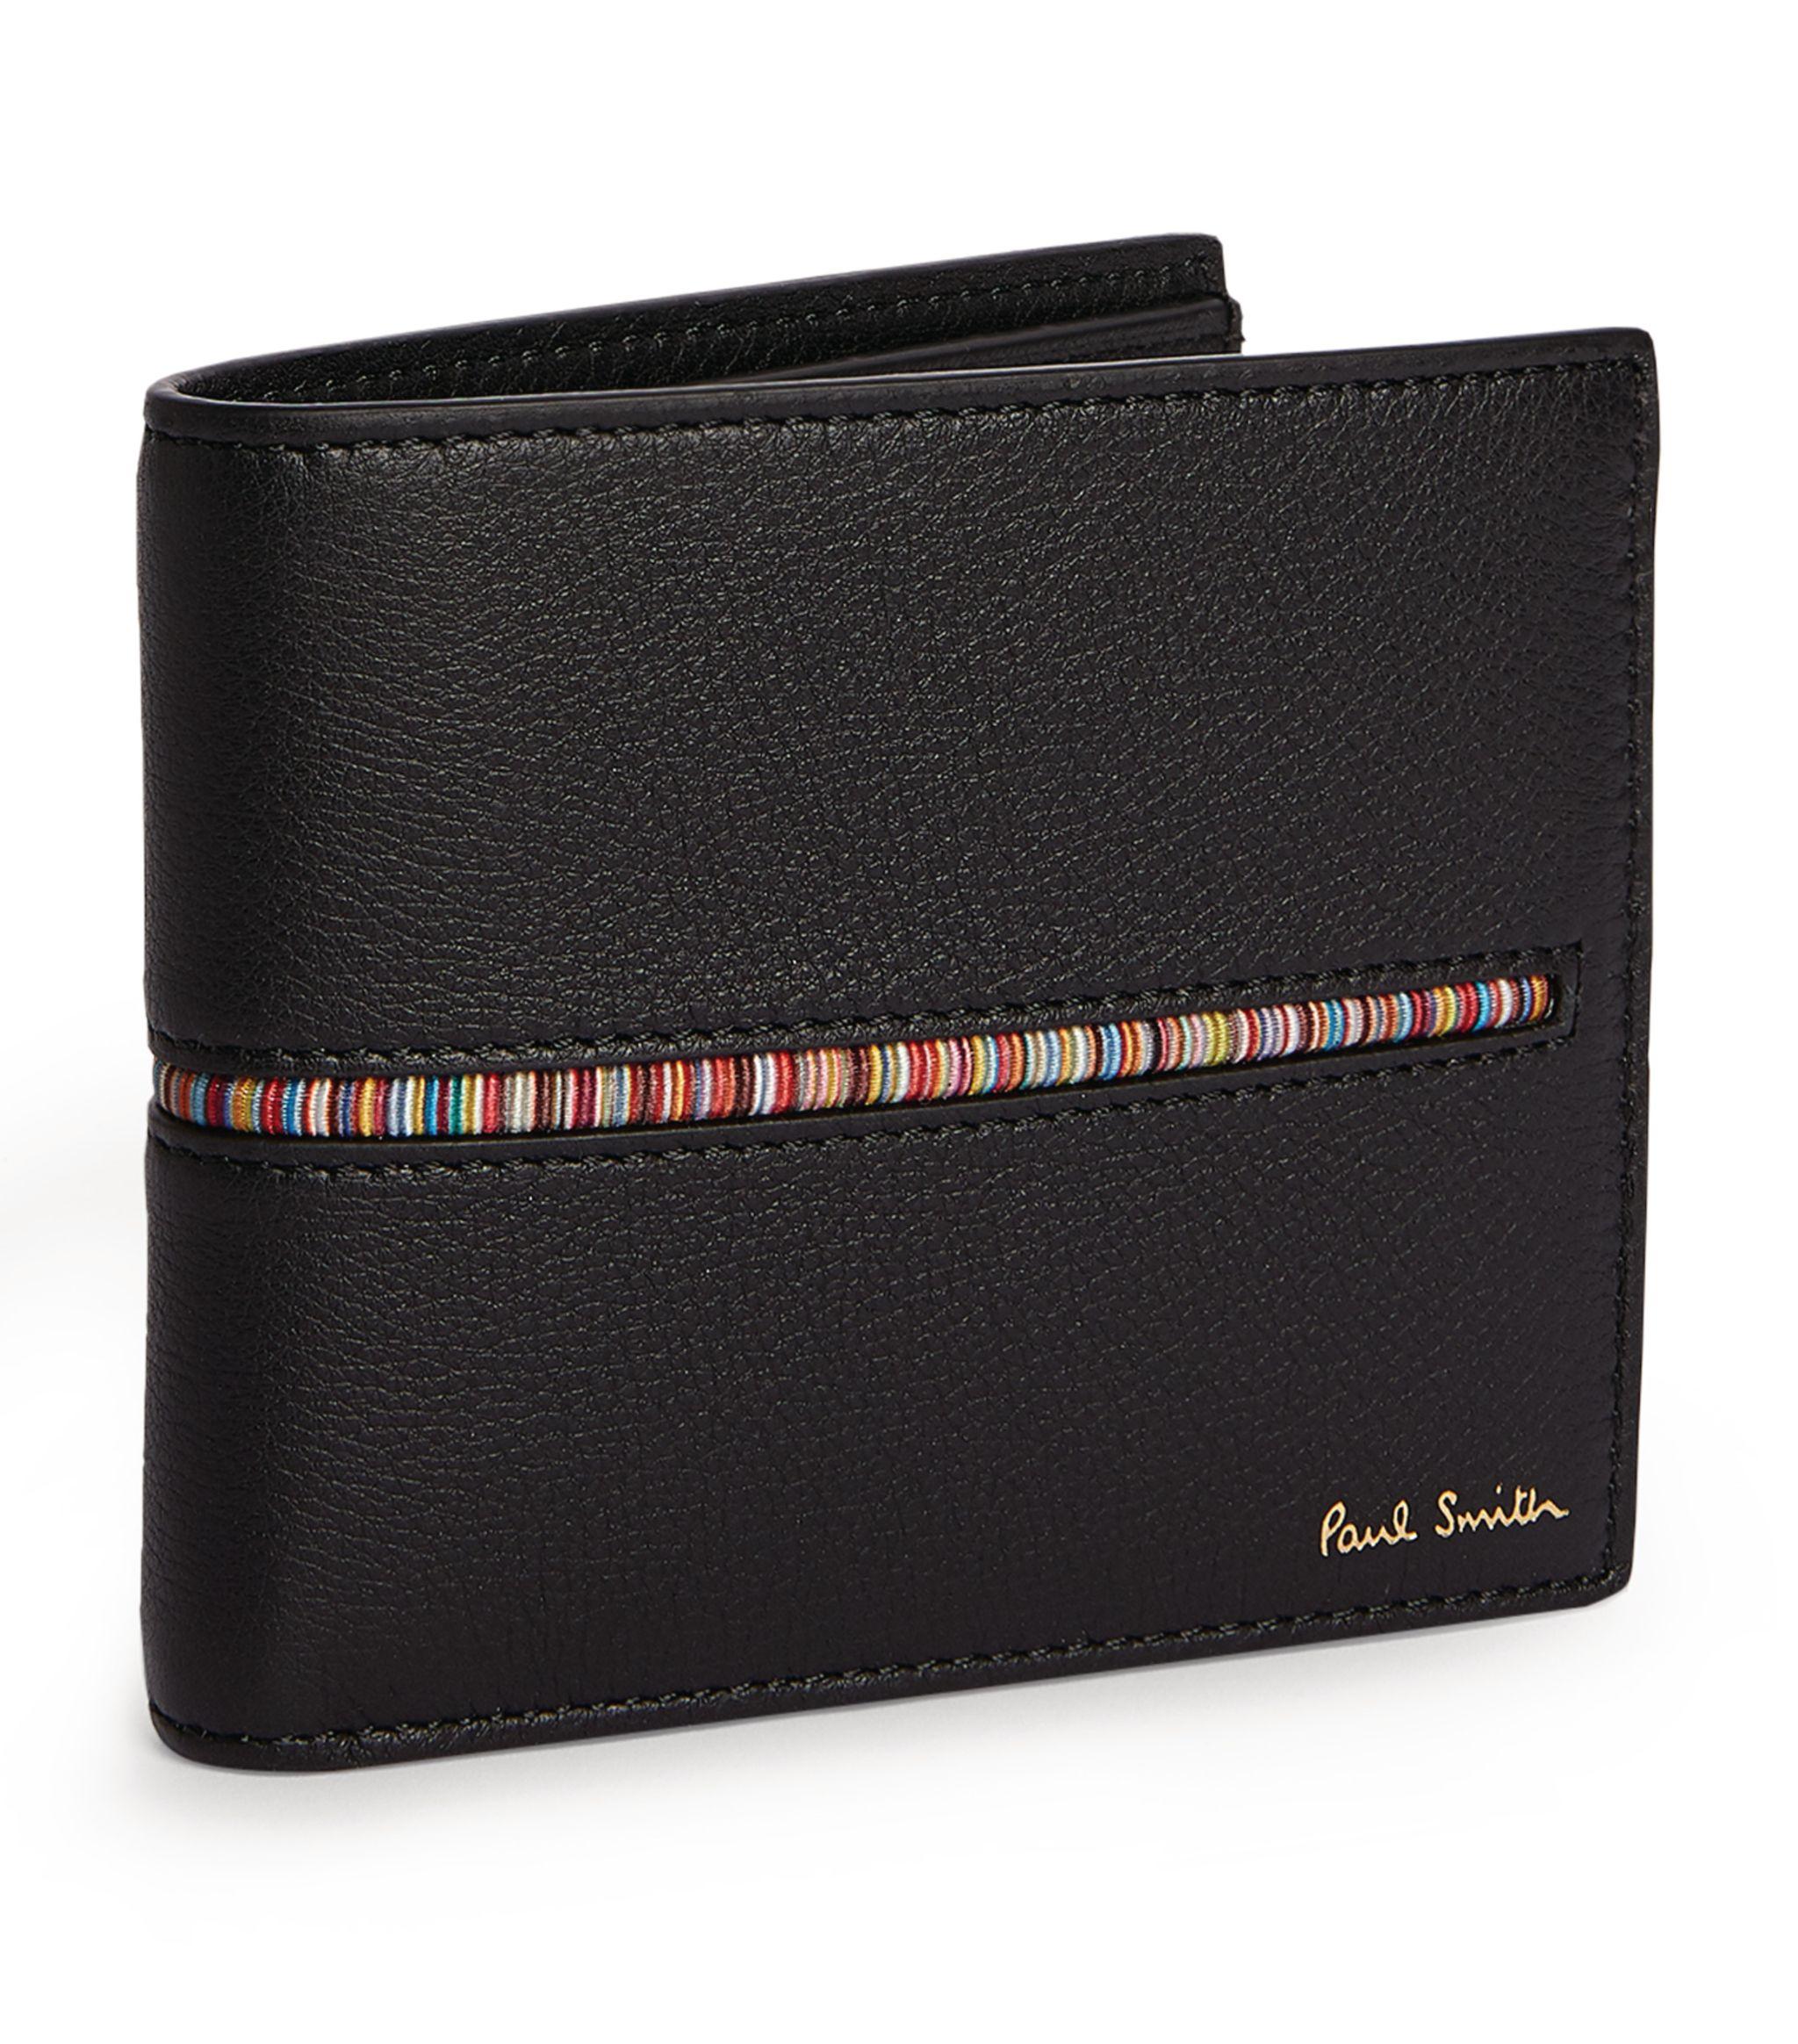 Paul Smith Signature Stripe Leather Bifold Wallet in Black for Men Lyst